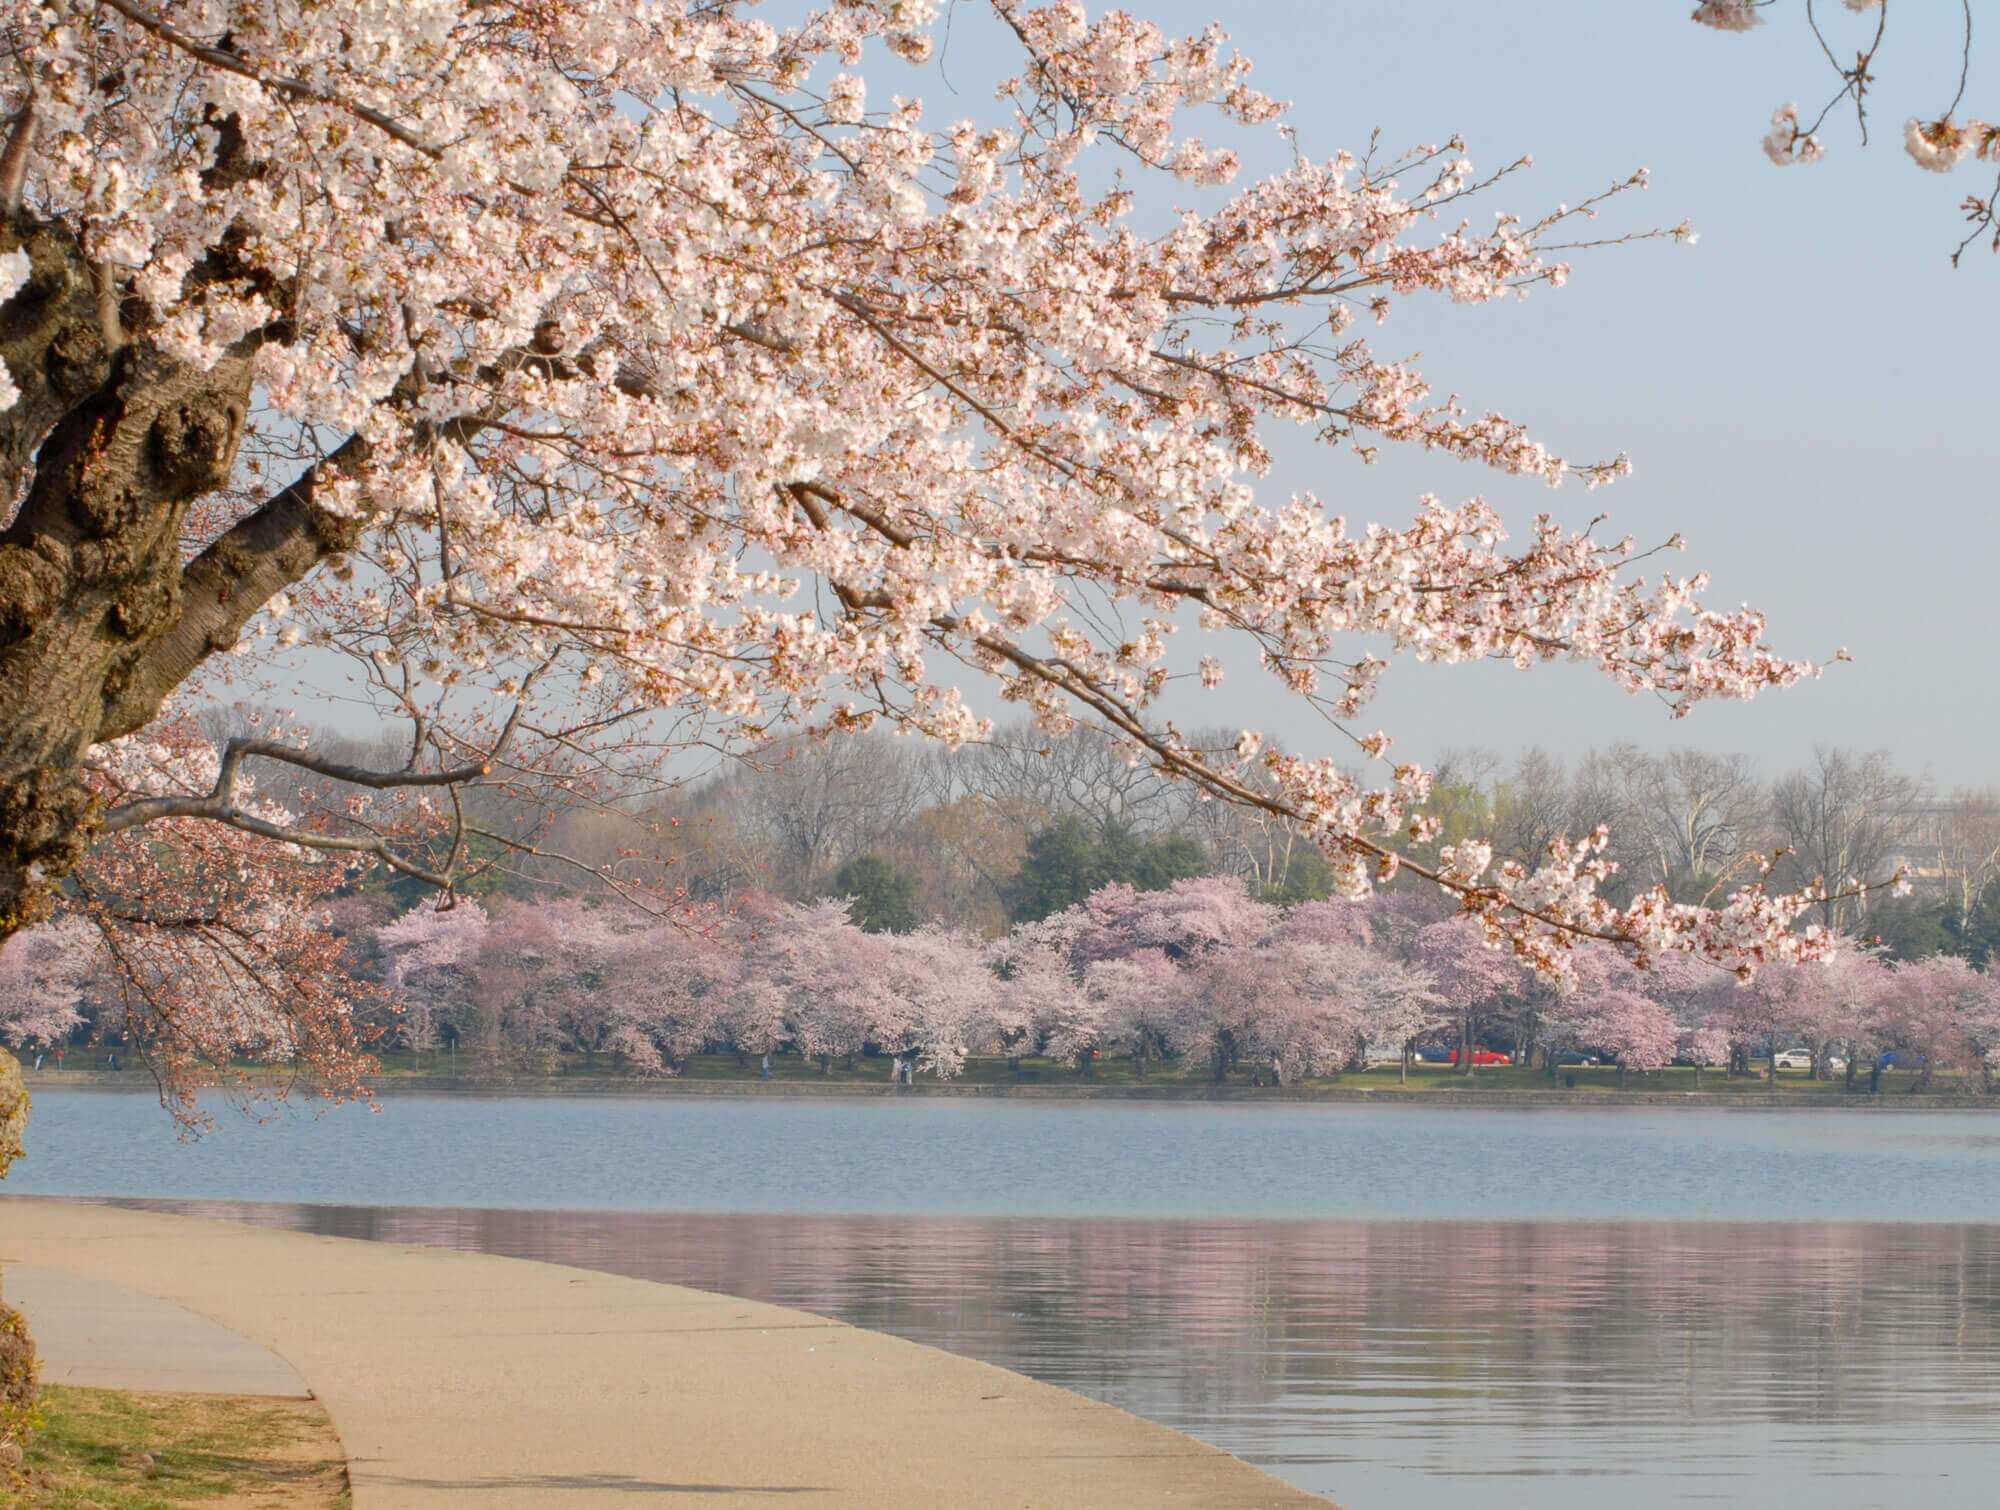 View of blooming cherry blossoms blooming from the Tidal Basin